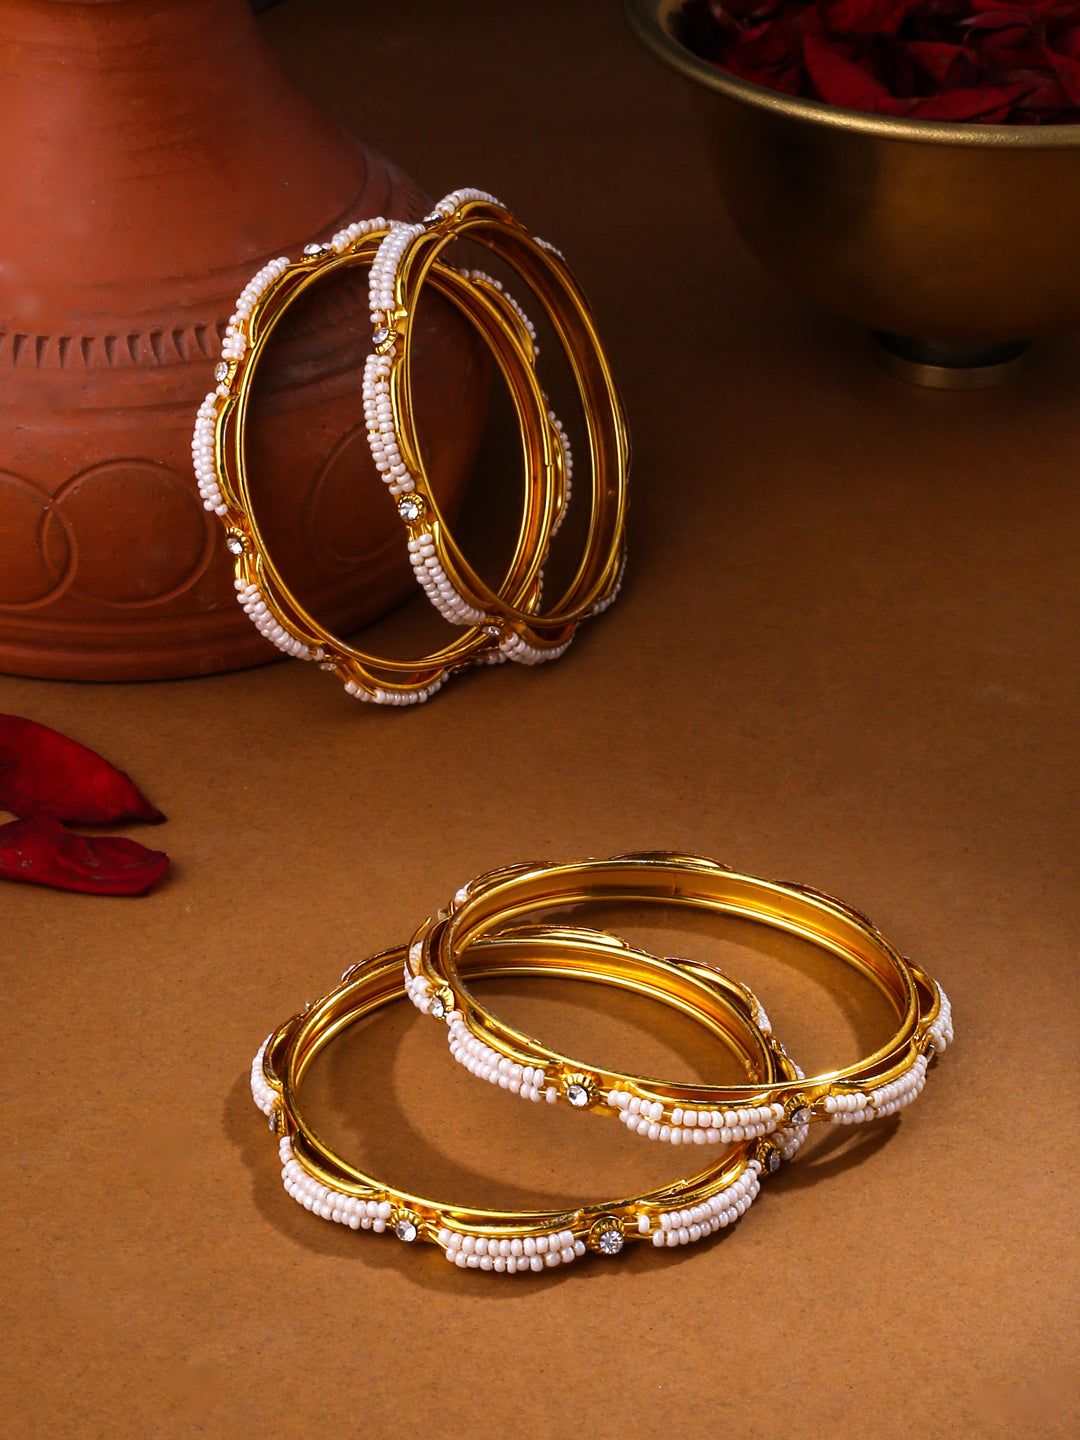 Women's Set Of 4 Gold-Plated Traditional Pearls Beaded Bangles